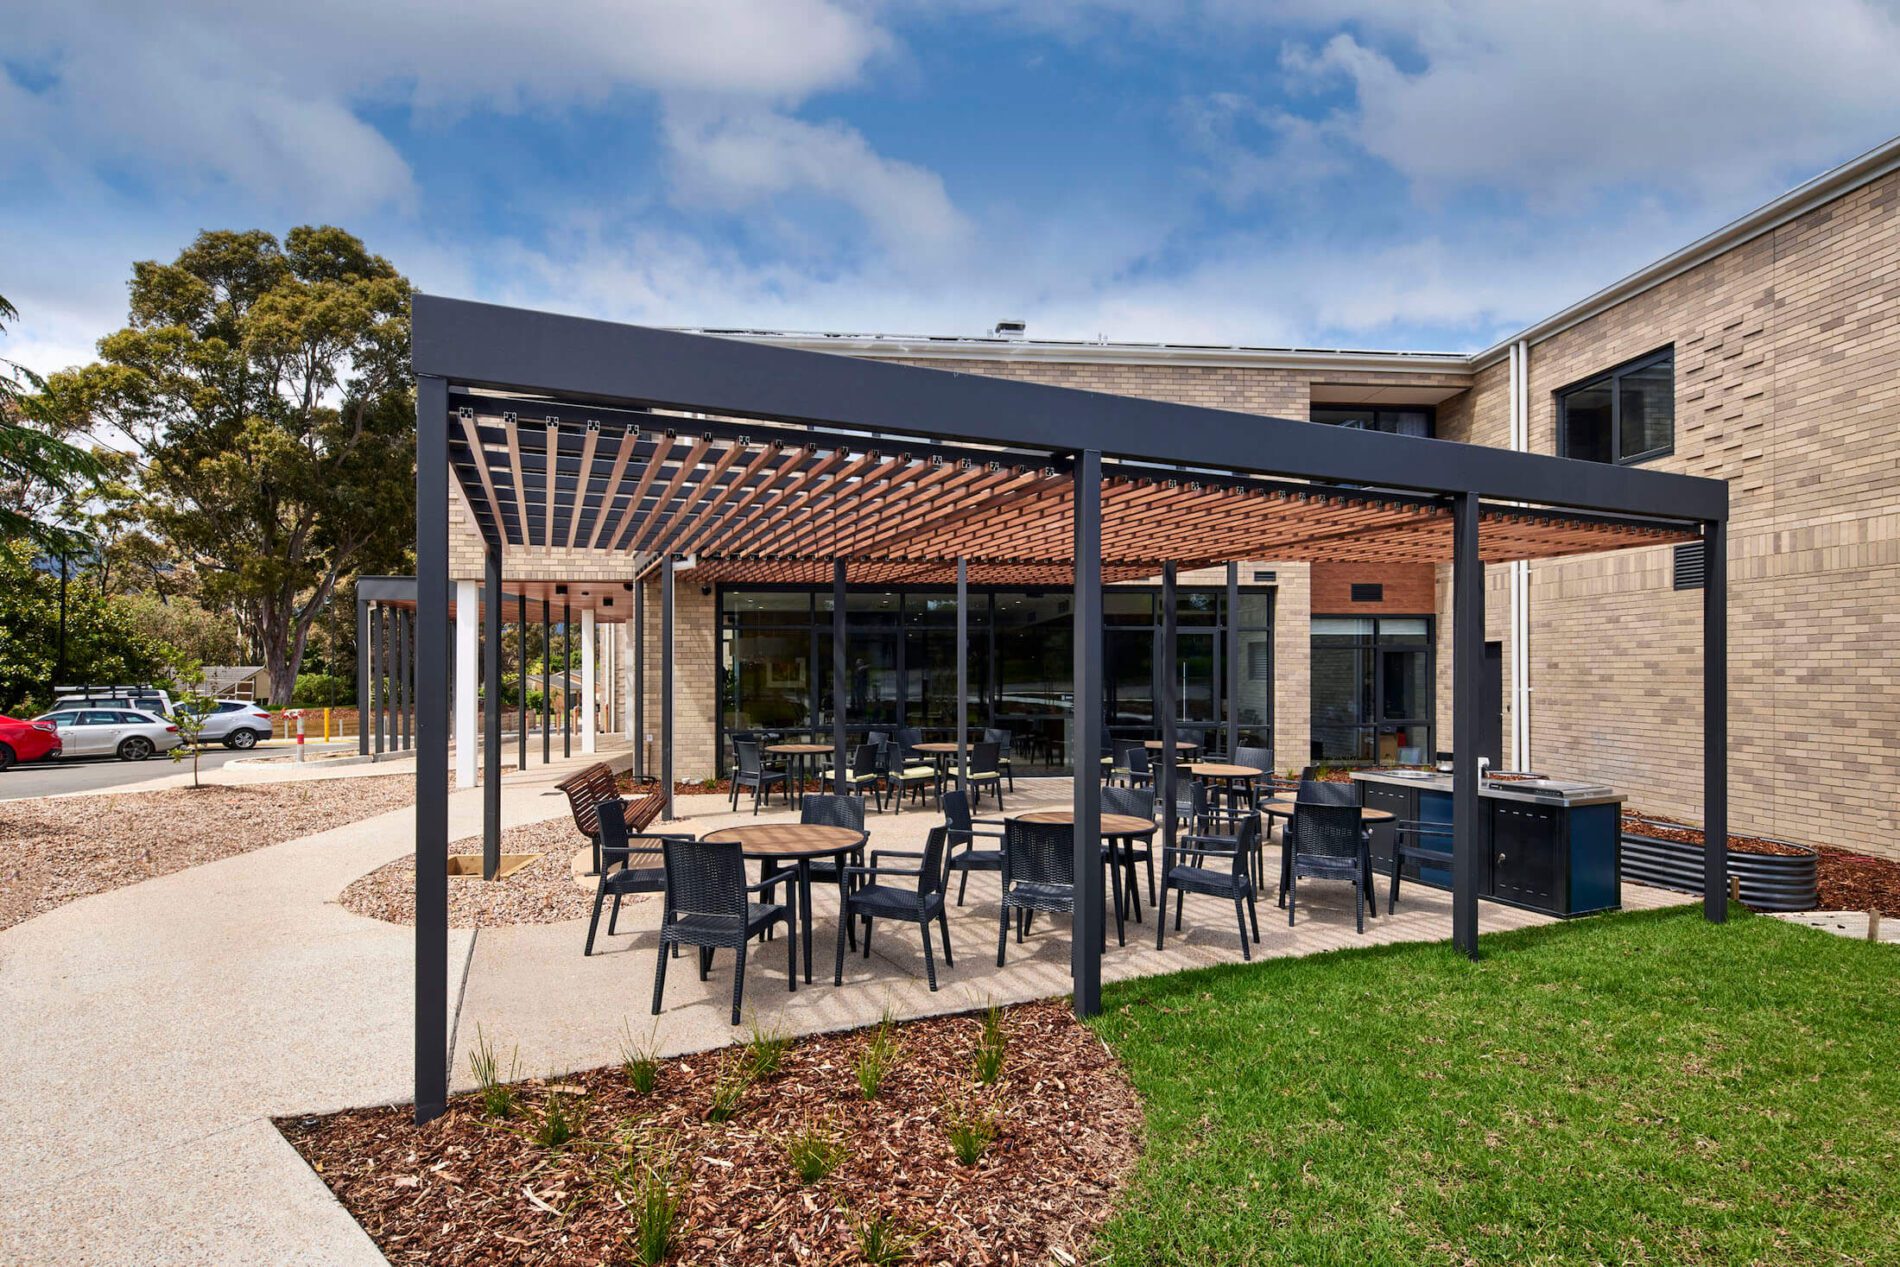 Outdoor cafe style dining and barbecue under a pergola structure, cream brick building in background